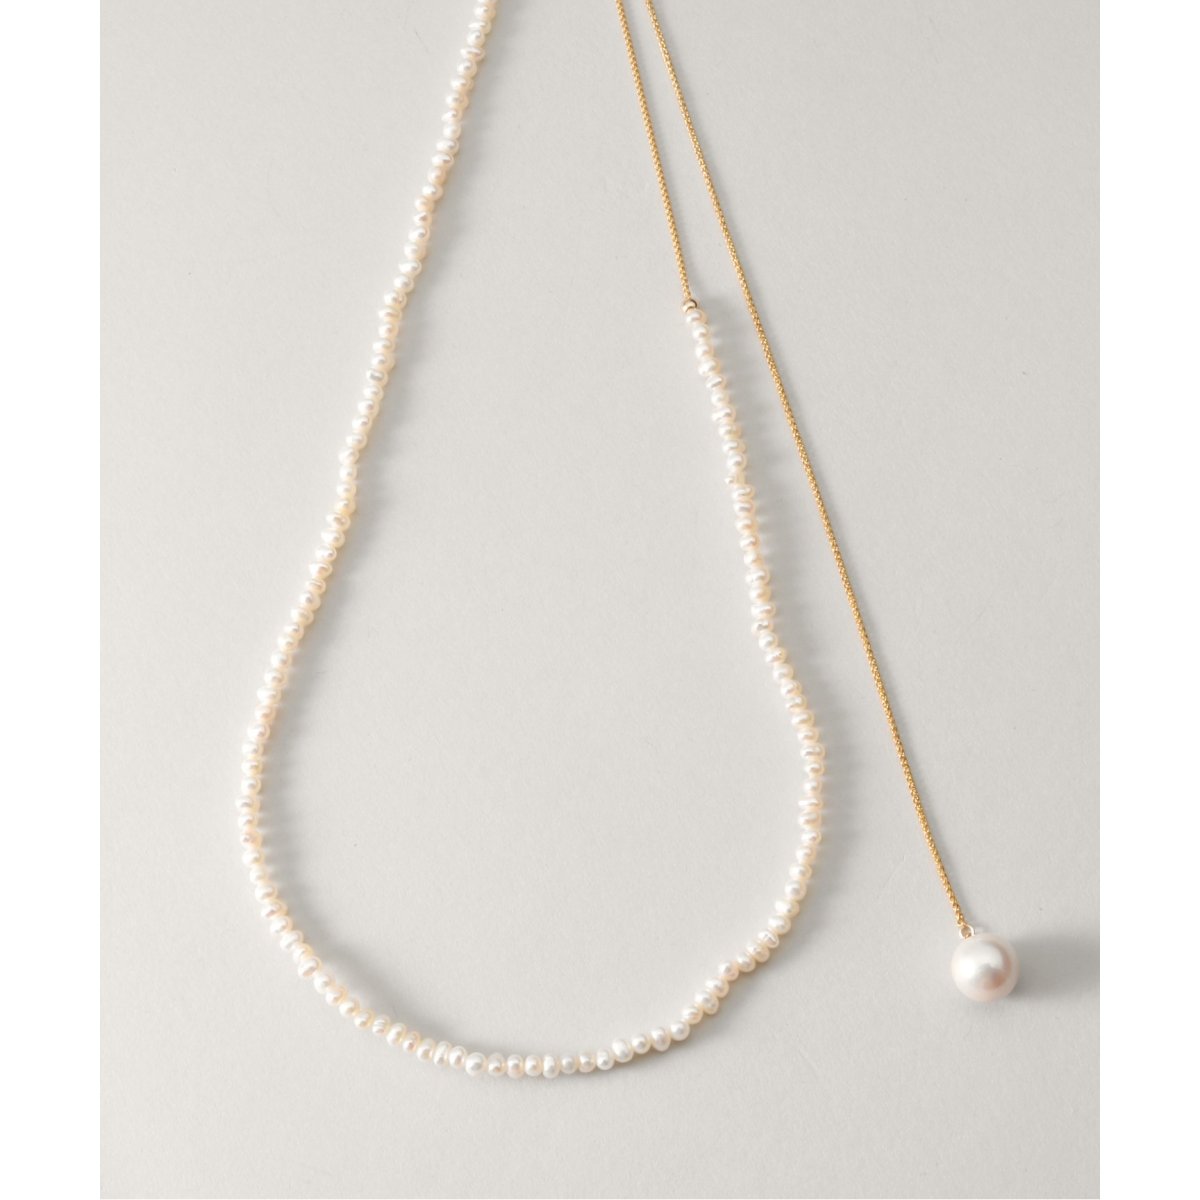 jour couture / ジュール クチュール】Slide Pearl Necklace ...